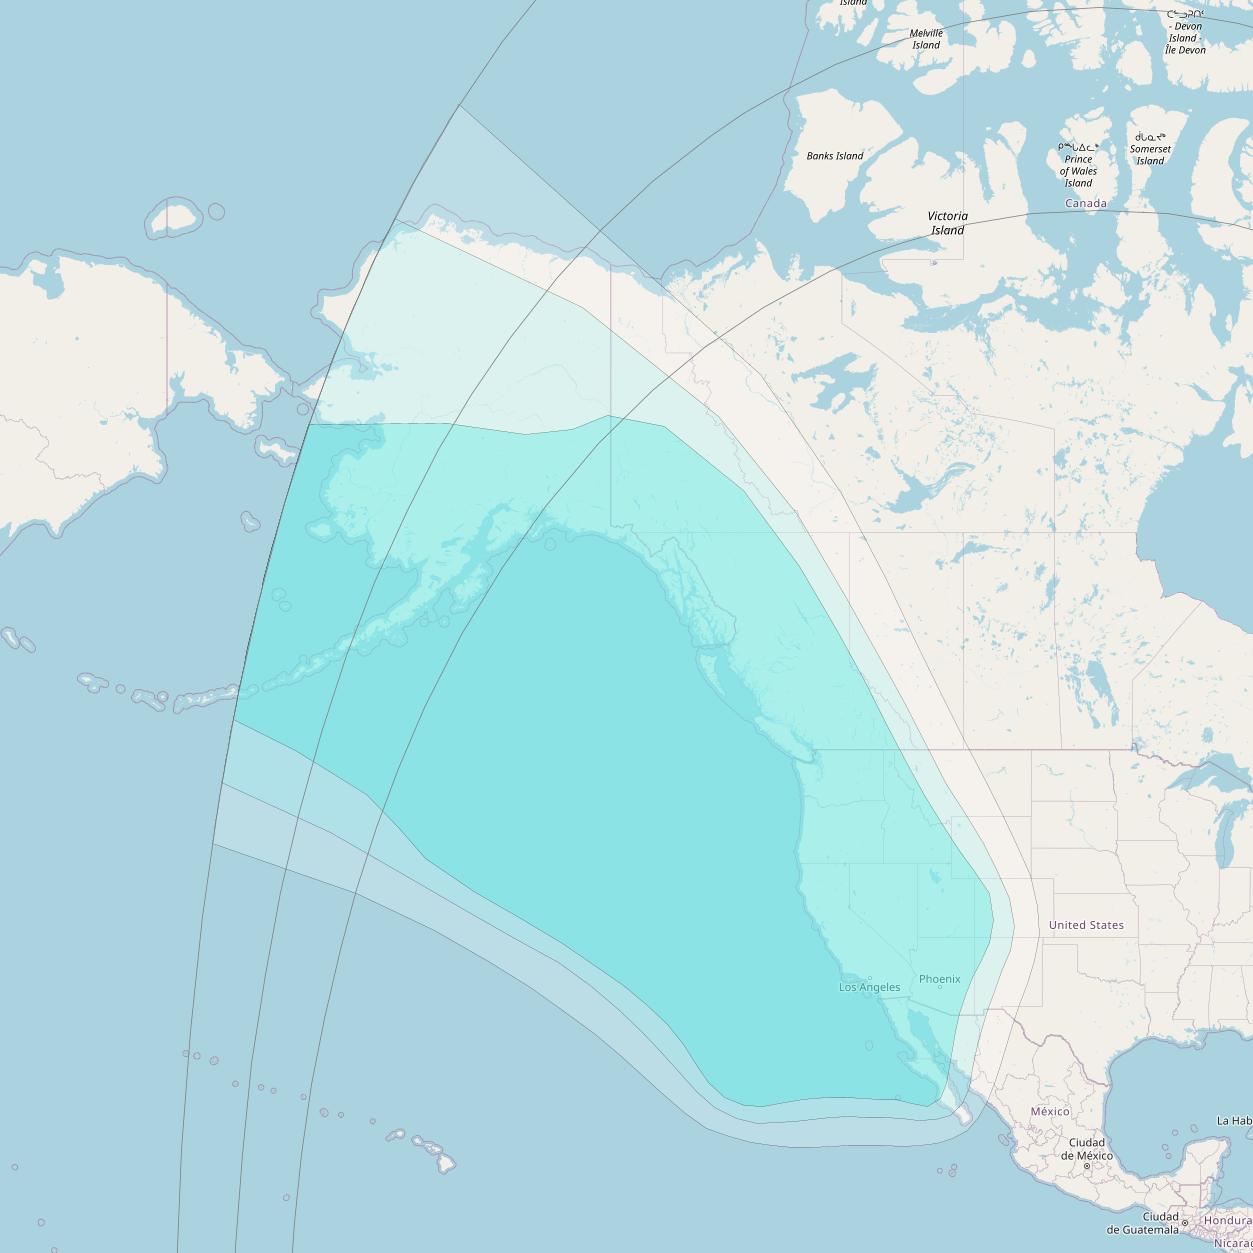 Inmarsat-4F3 at 98° W downlink L-band R016 Regional Spot beam coverage map